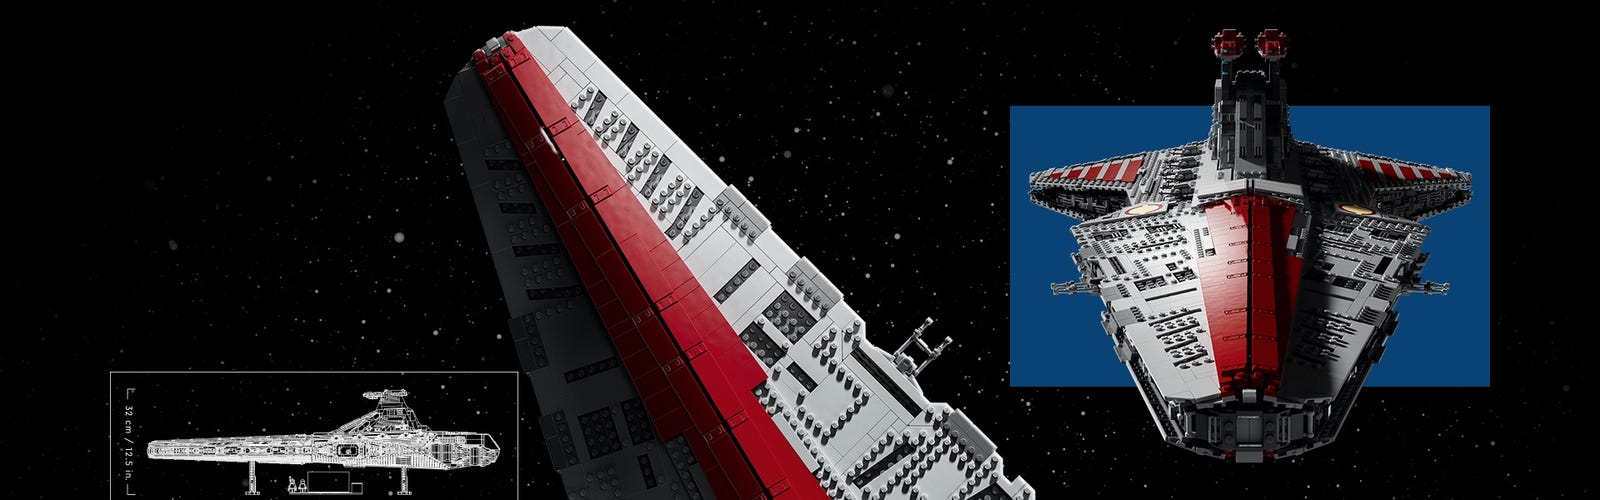 New LEGO Star Wars Venator-Class Republic Attack Cruiser is Enormous - Bell  of Lost Souls